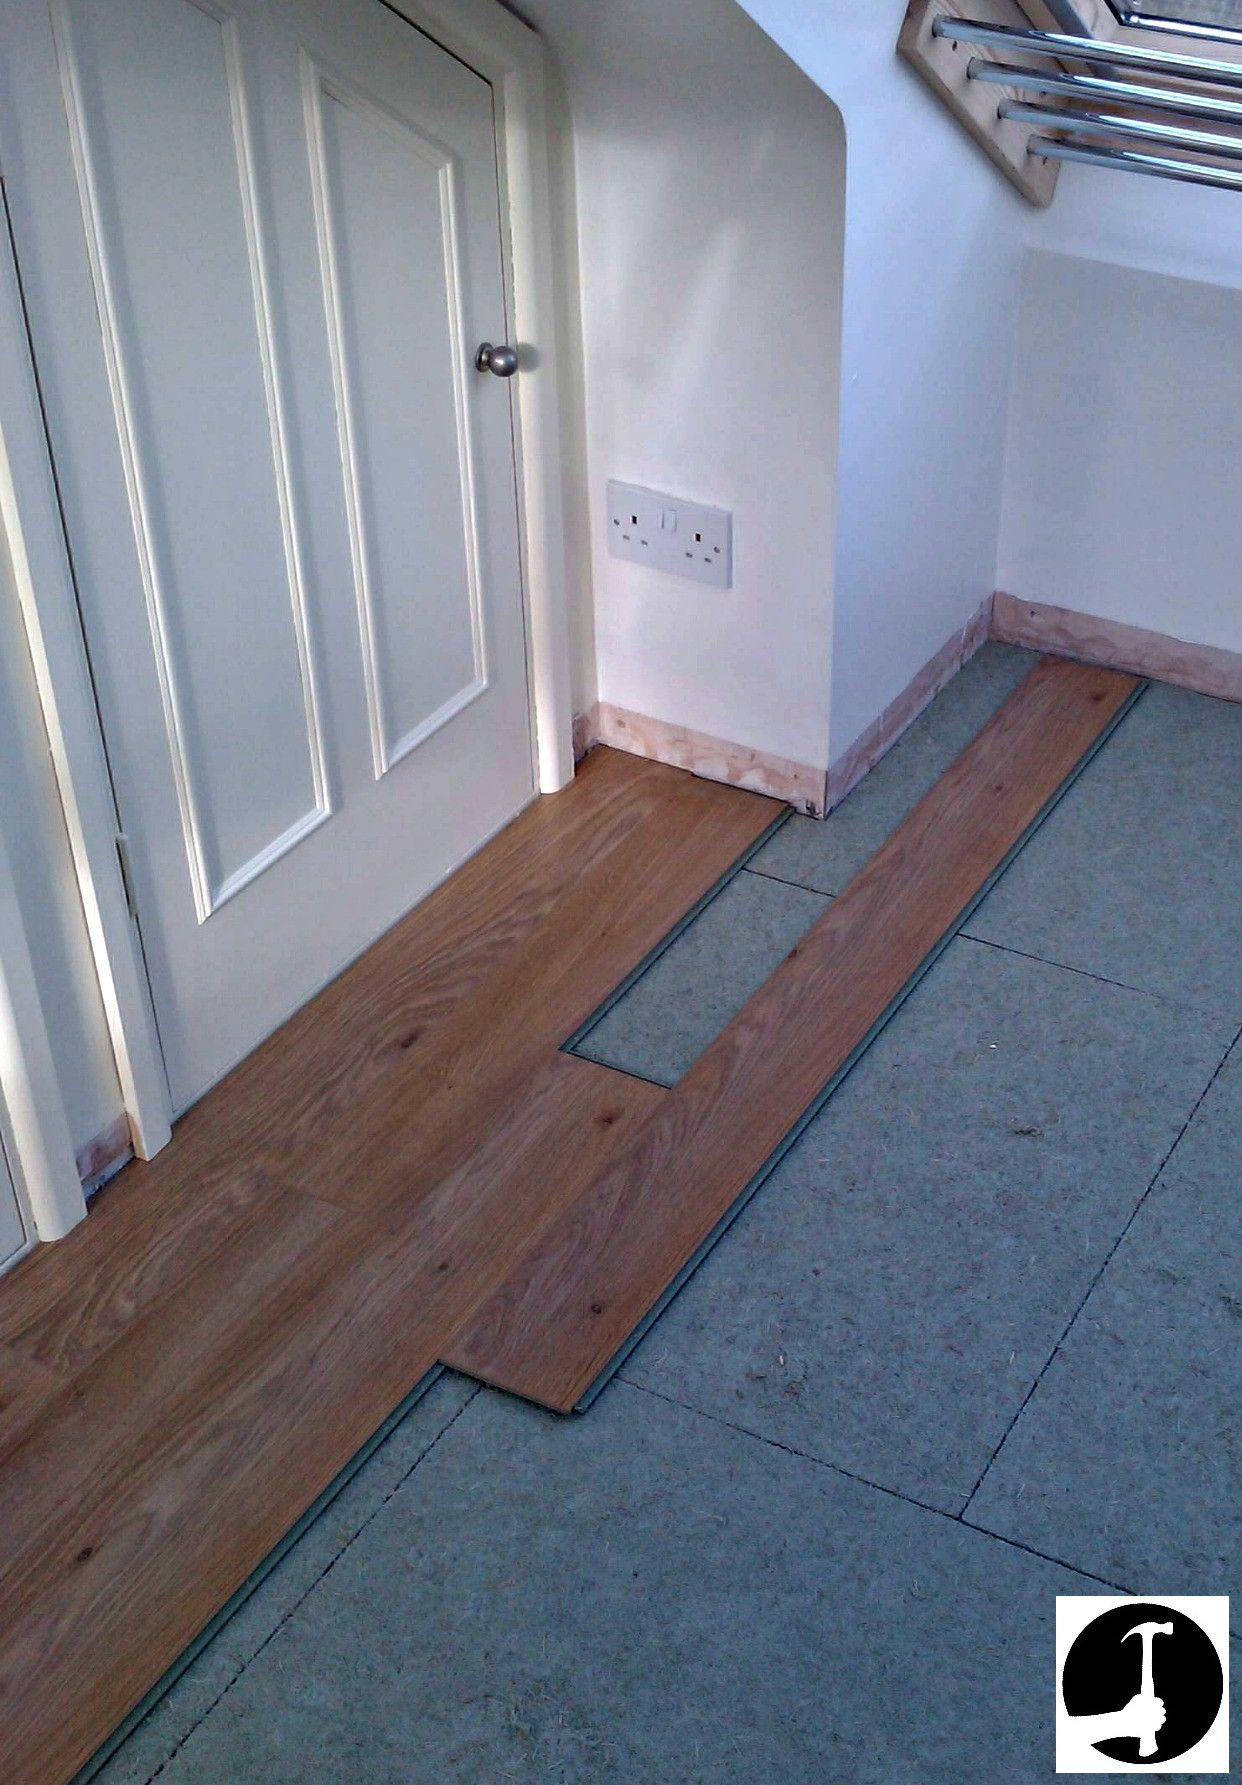 25 Fabulous How Much Does Installing Hardwood Floors Cost 2024 free download how much does installing hardwood floors cost of how to install laminate flooring with ease glued glue less systems with setting out laminate flooring